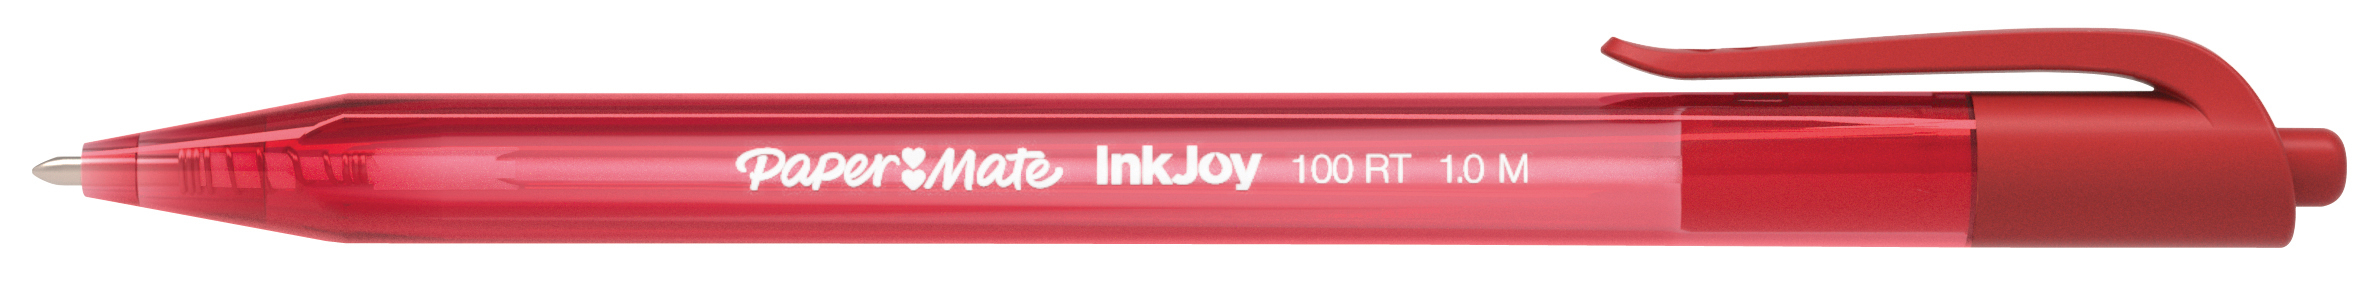 PAPERMATE Stylo à bille Inkjoy 100RT M S0957050 rouge rouge